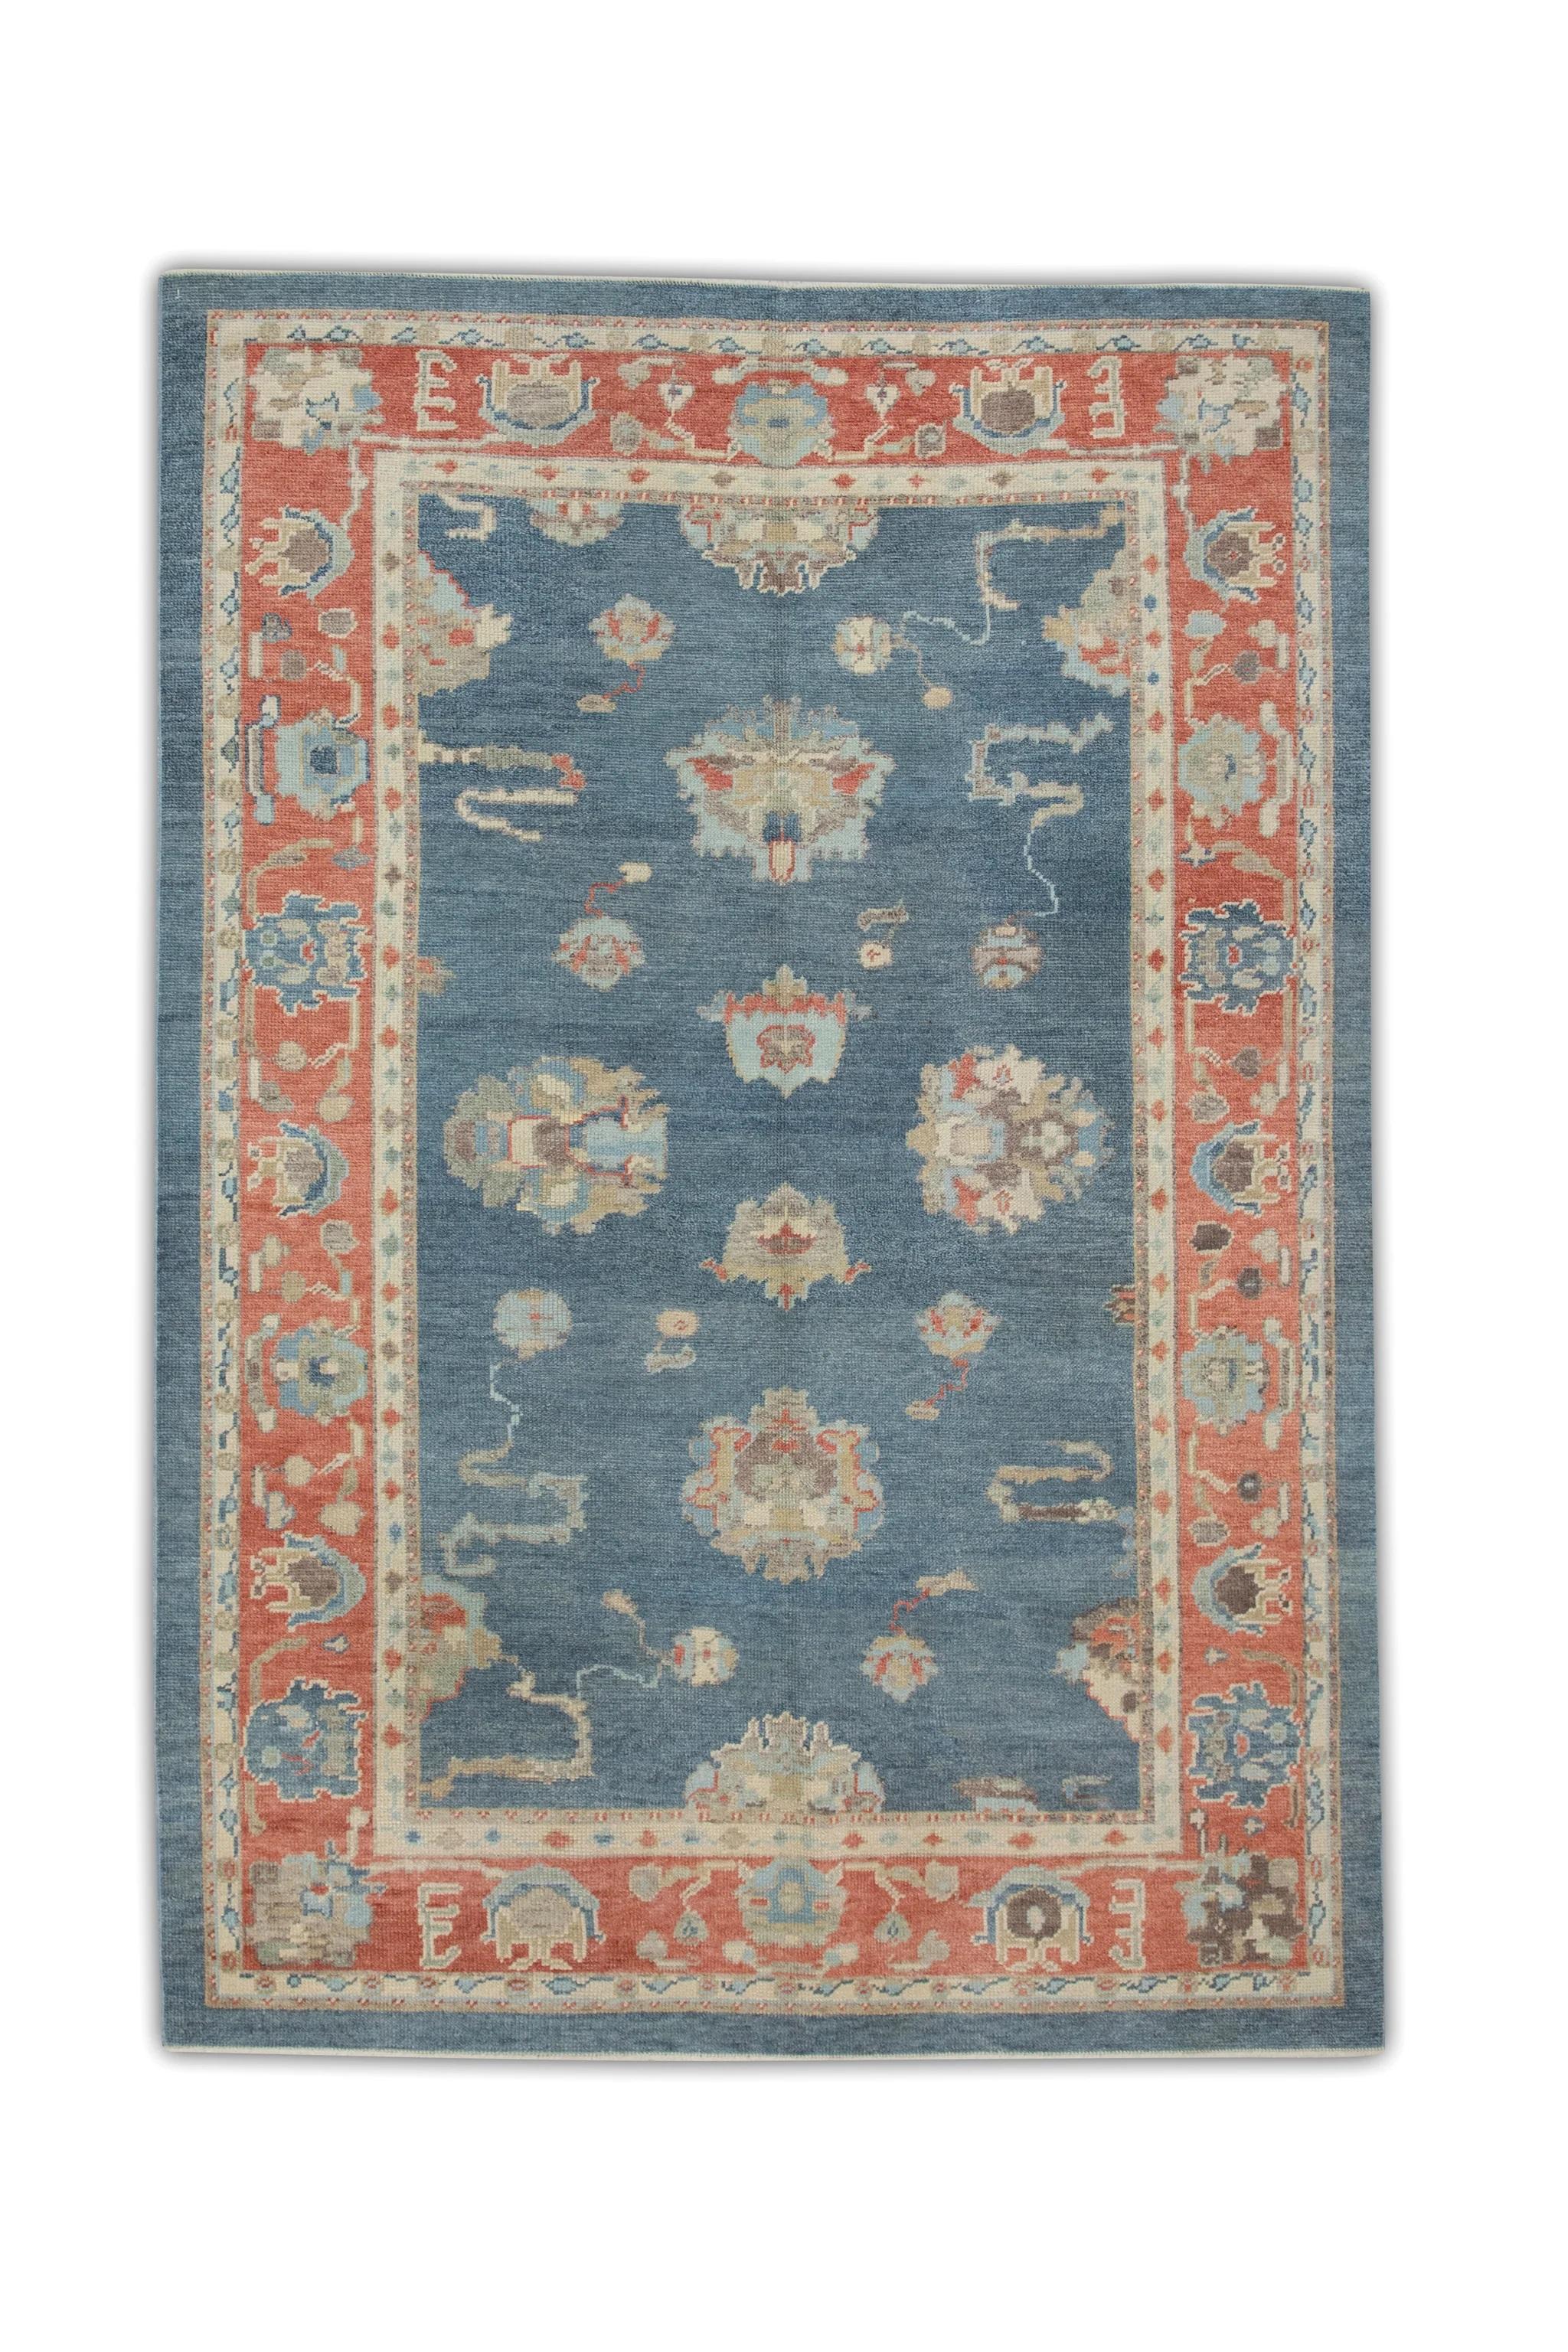 Red and Blue Floral Handwoven Wool Turkish Oushak Rug 6' x 8'6